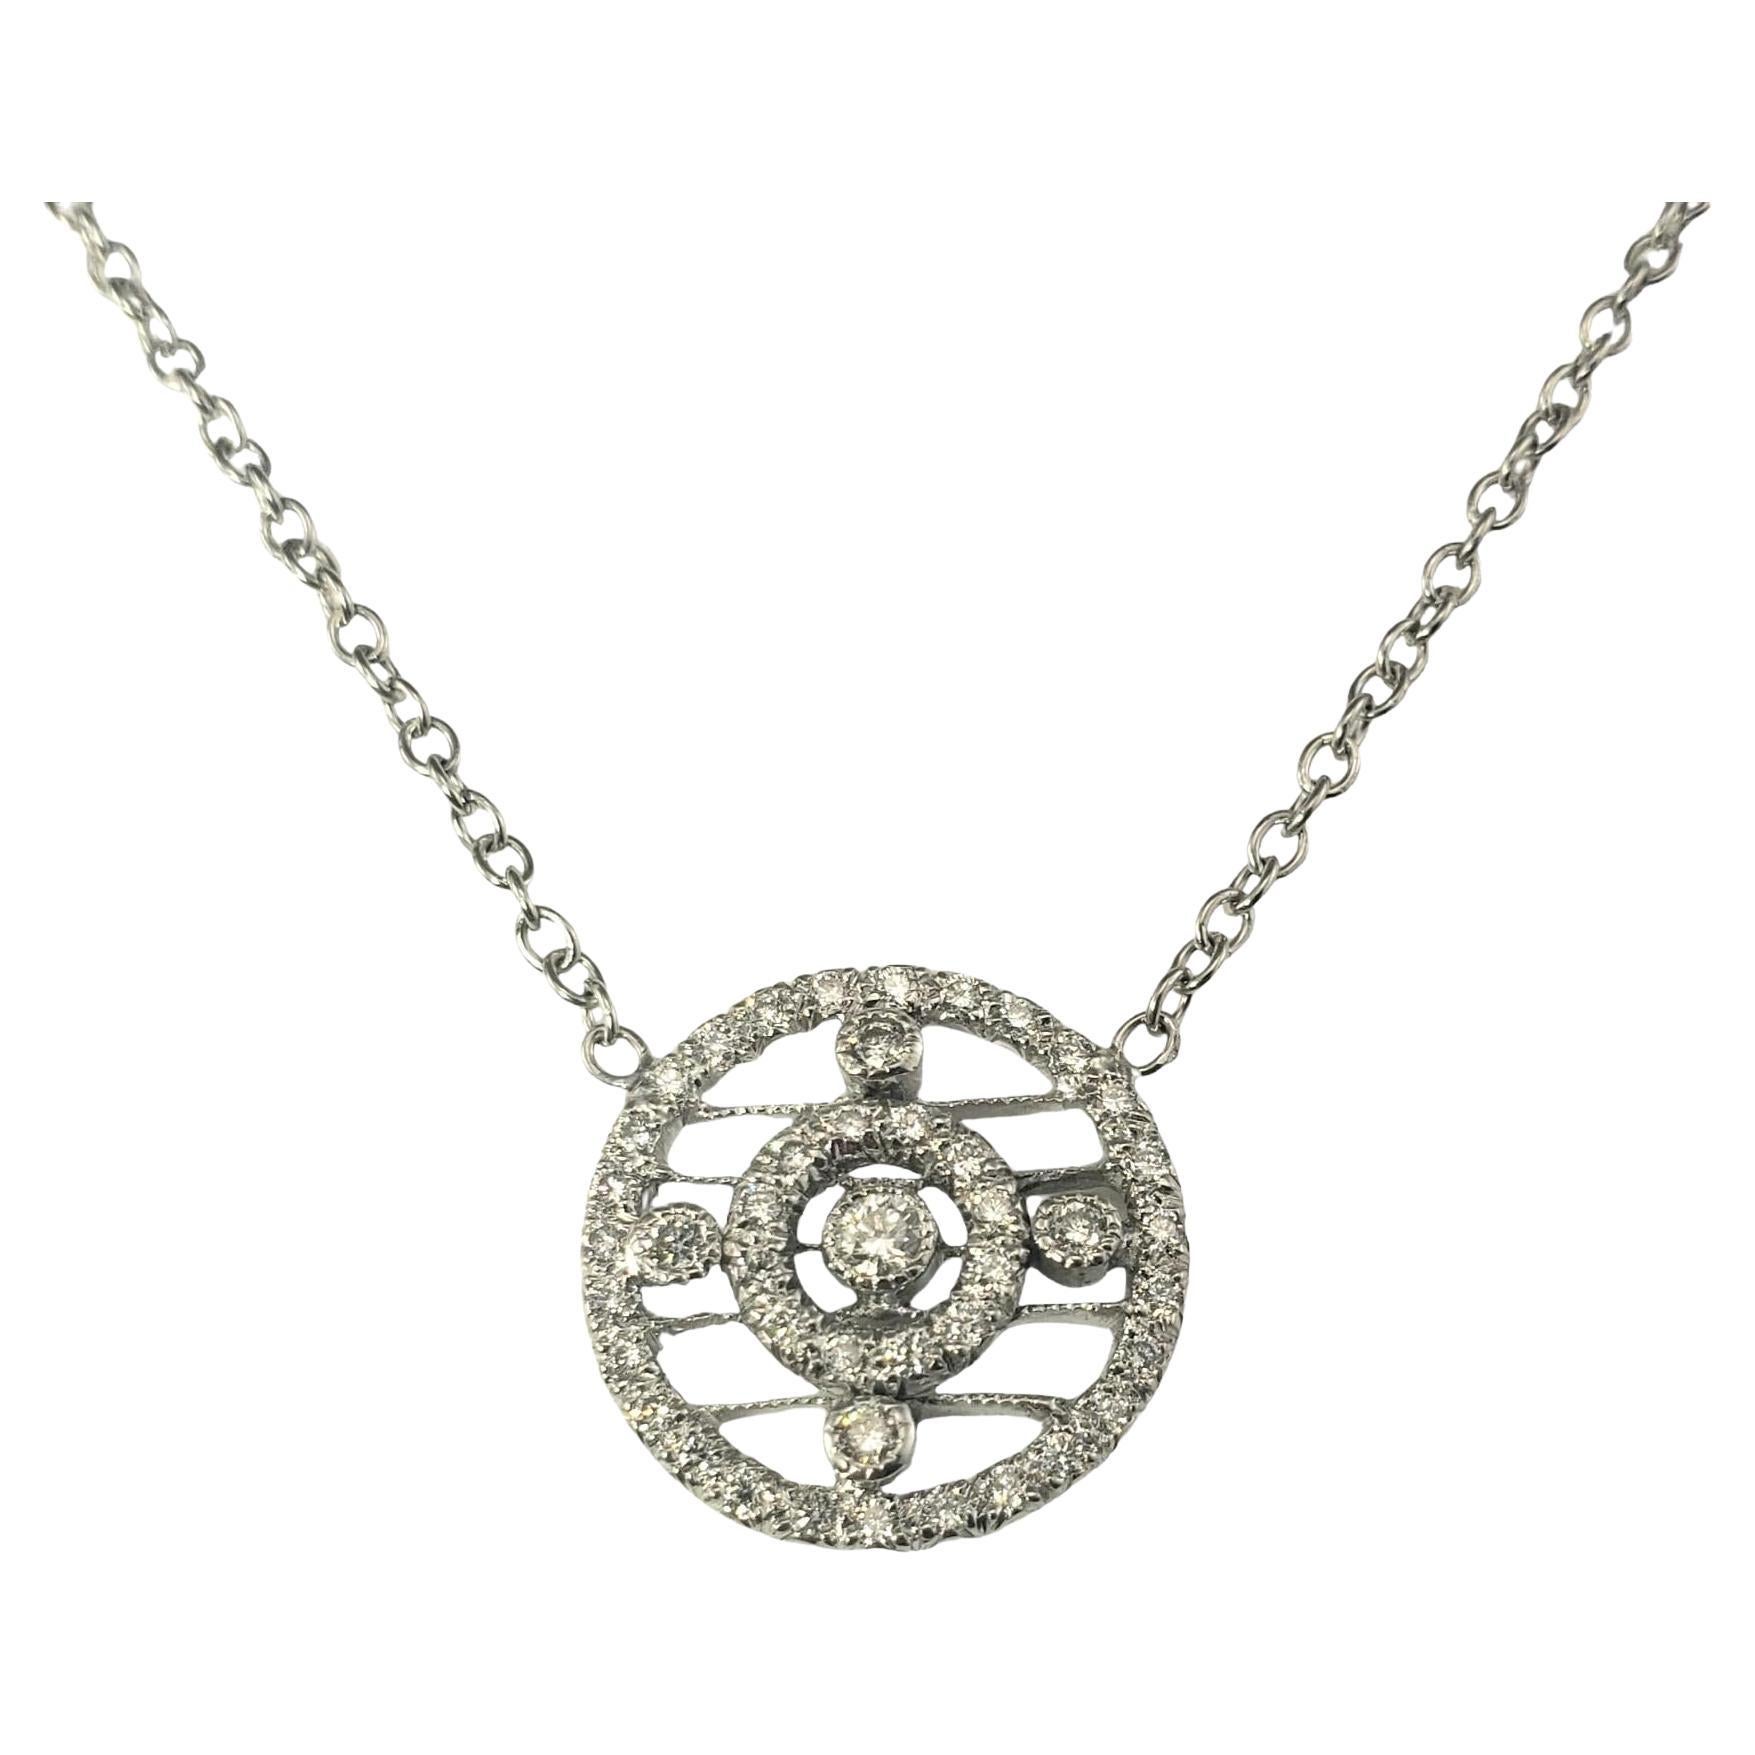 18 Karat White Gold and Diamond Circle Pendant Necklace #16824 For Sale